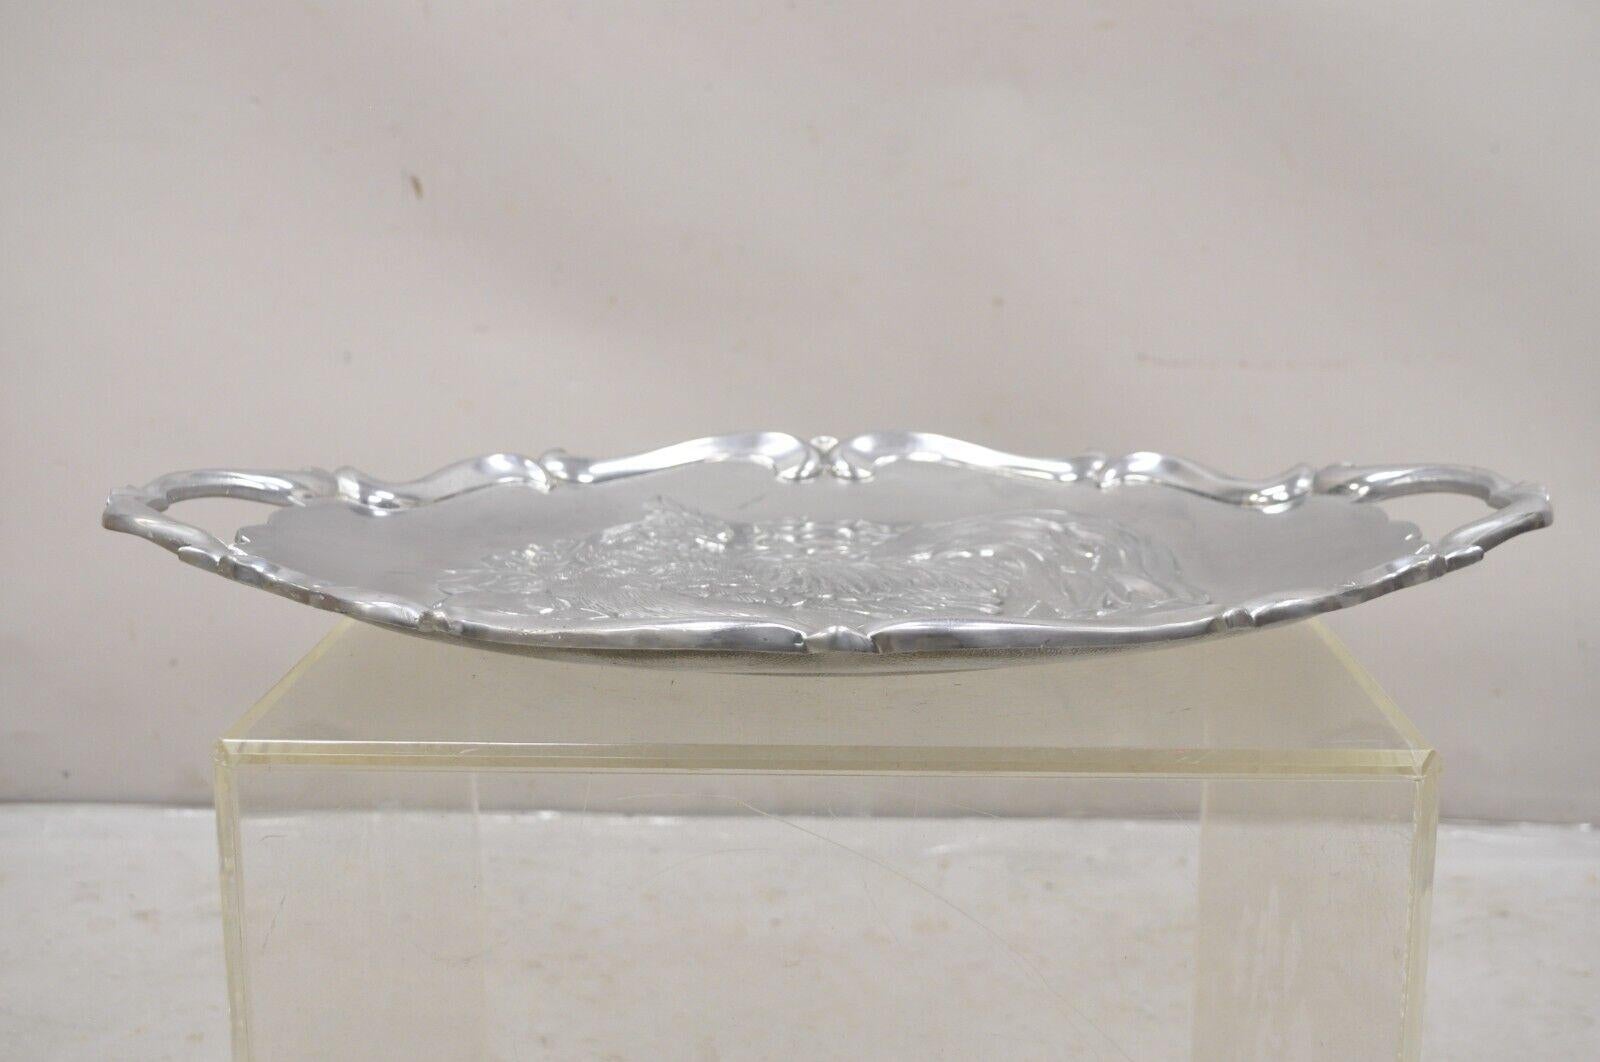 Vintage Lenox Retired Large Rooster Metal Holiday Serving Platter Tray.  Circa late 20th Century. Measurements: 2